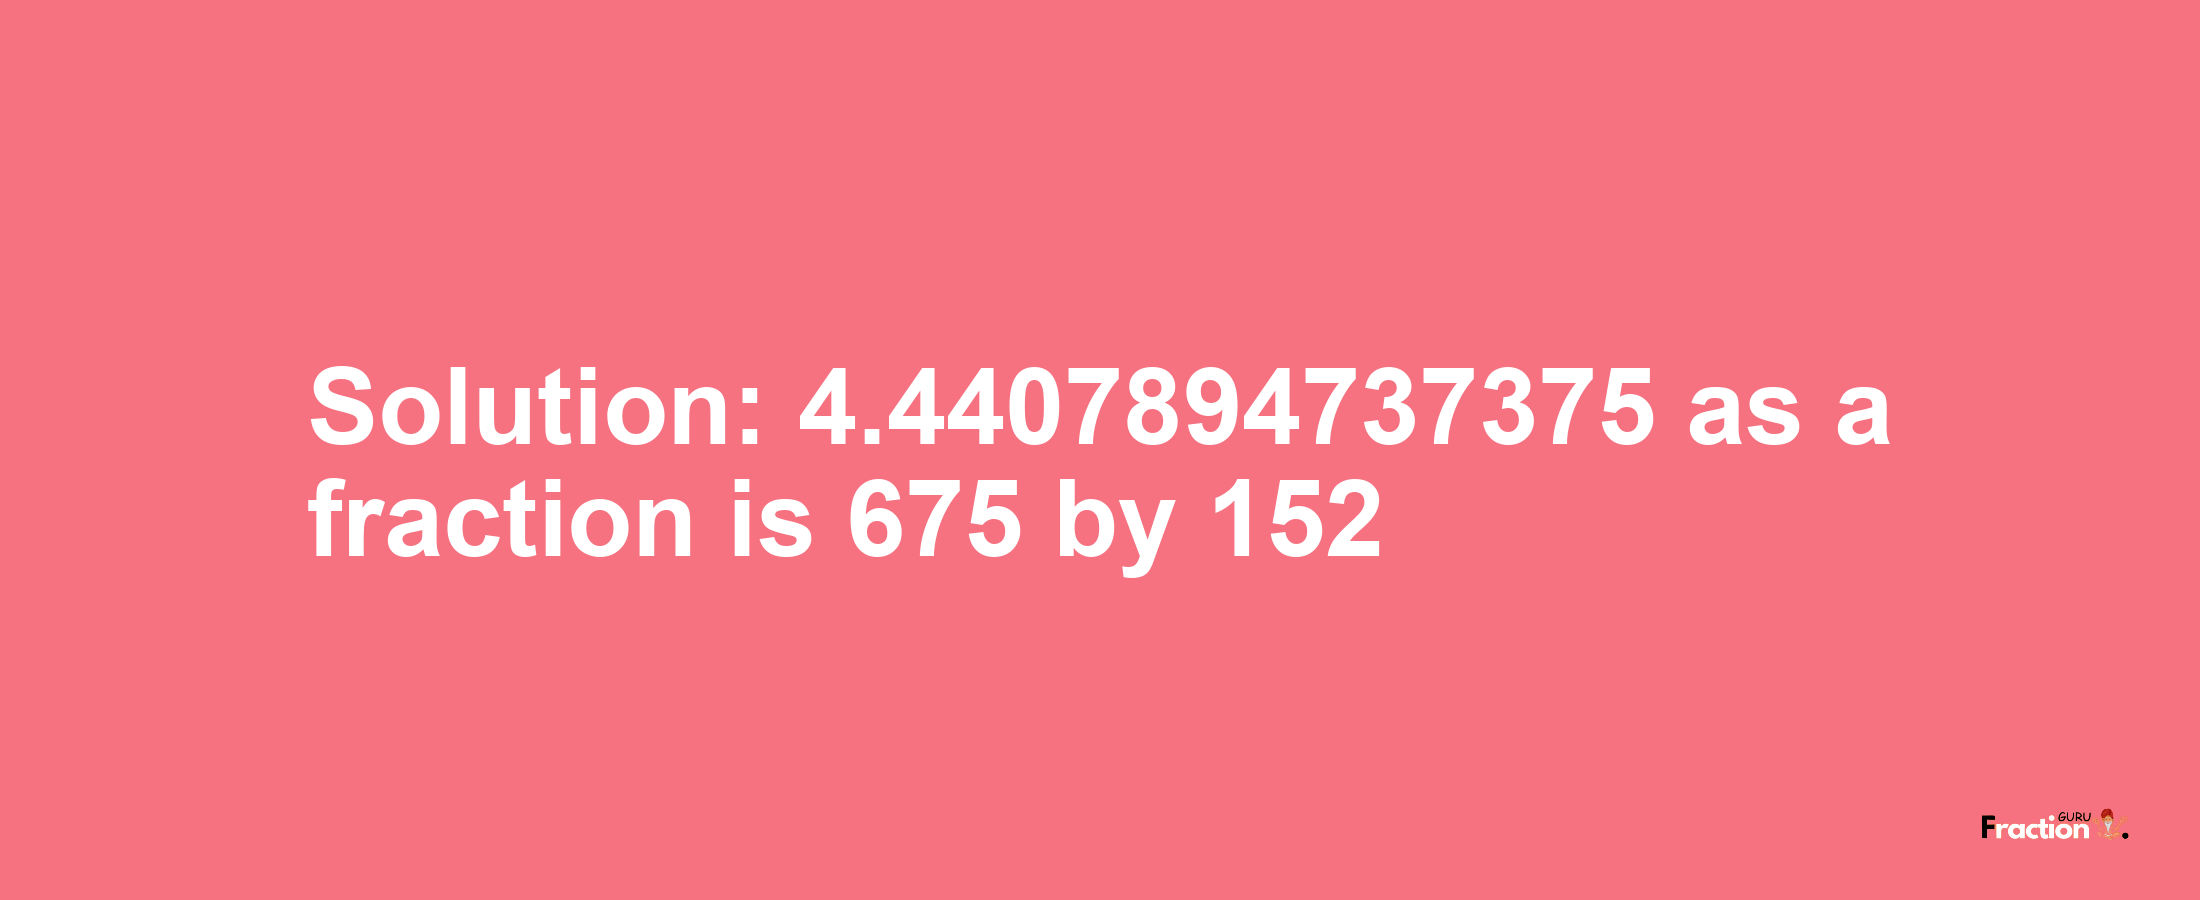 Solution:4.4407894737375 as a fraction is 675/152